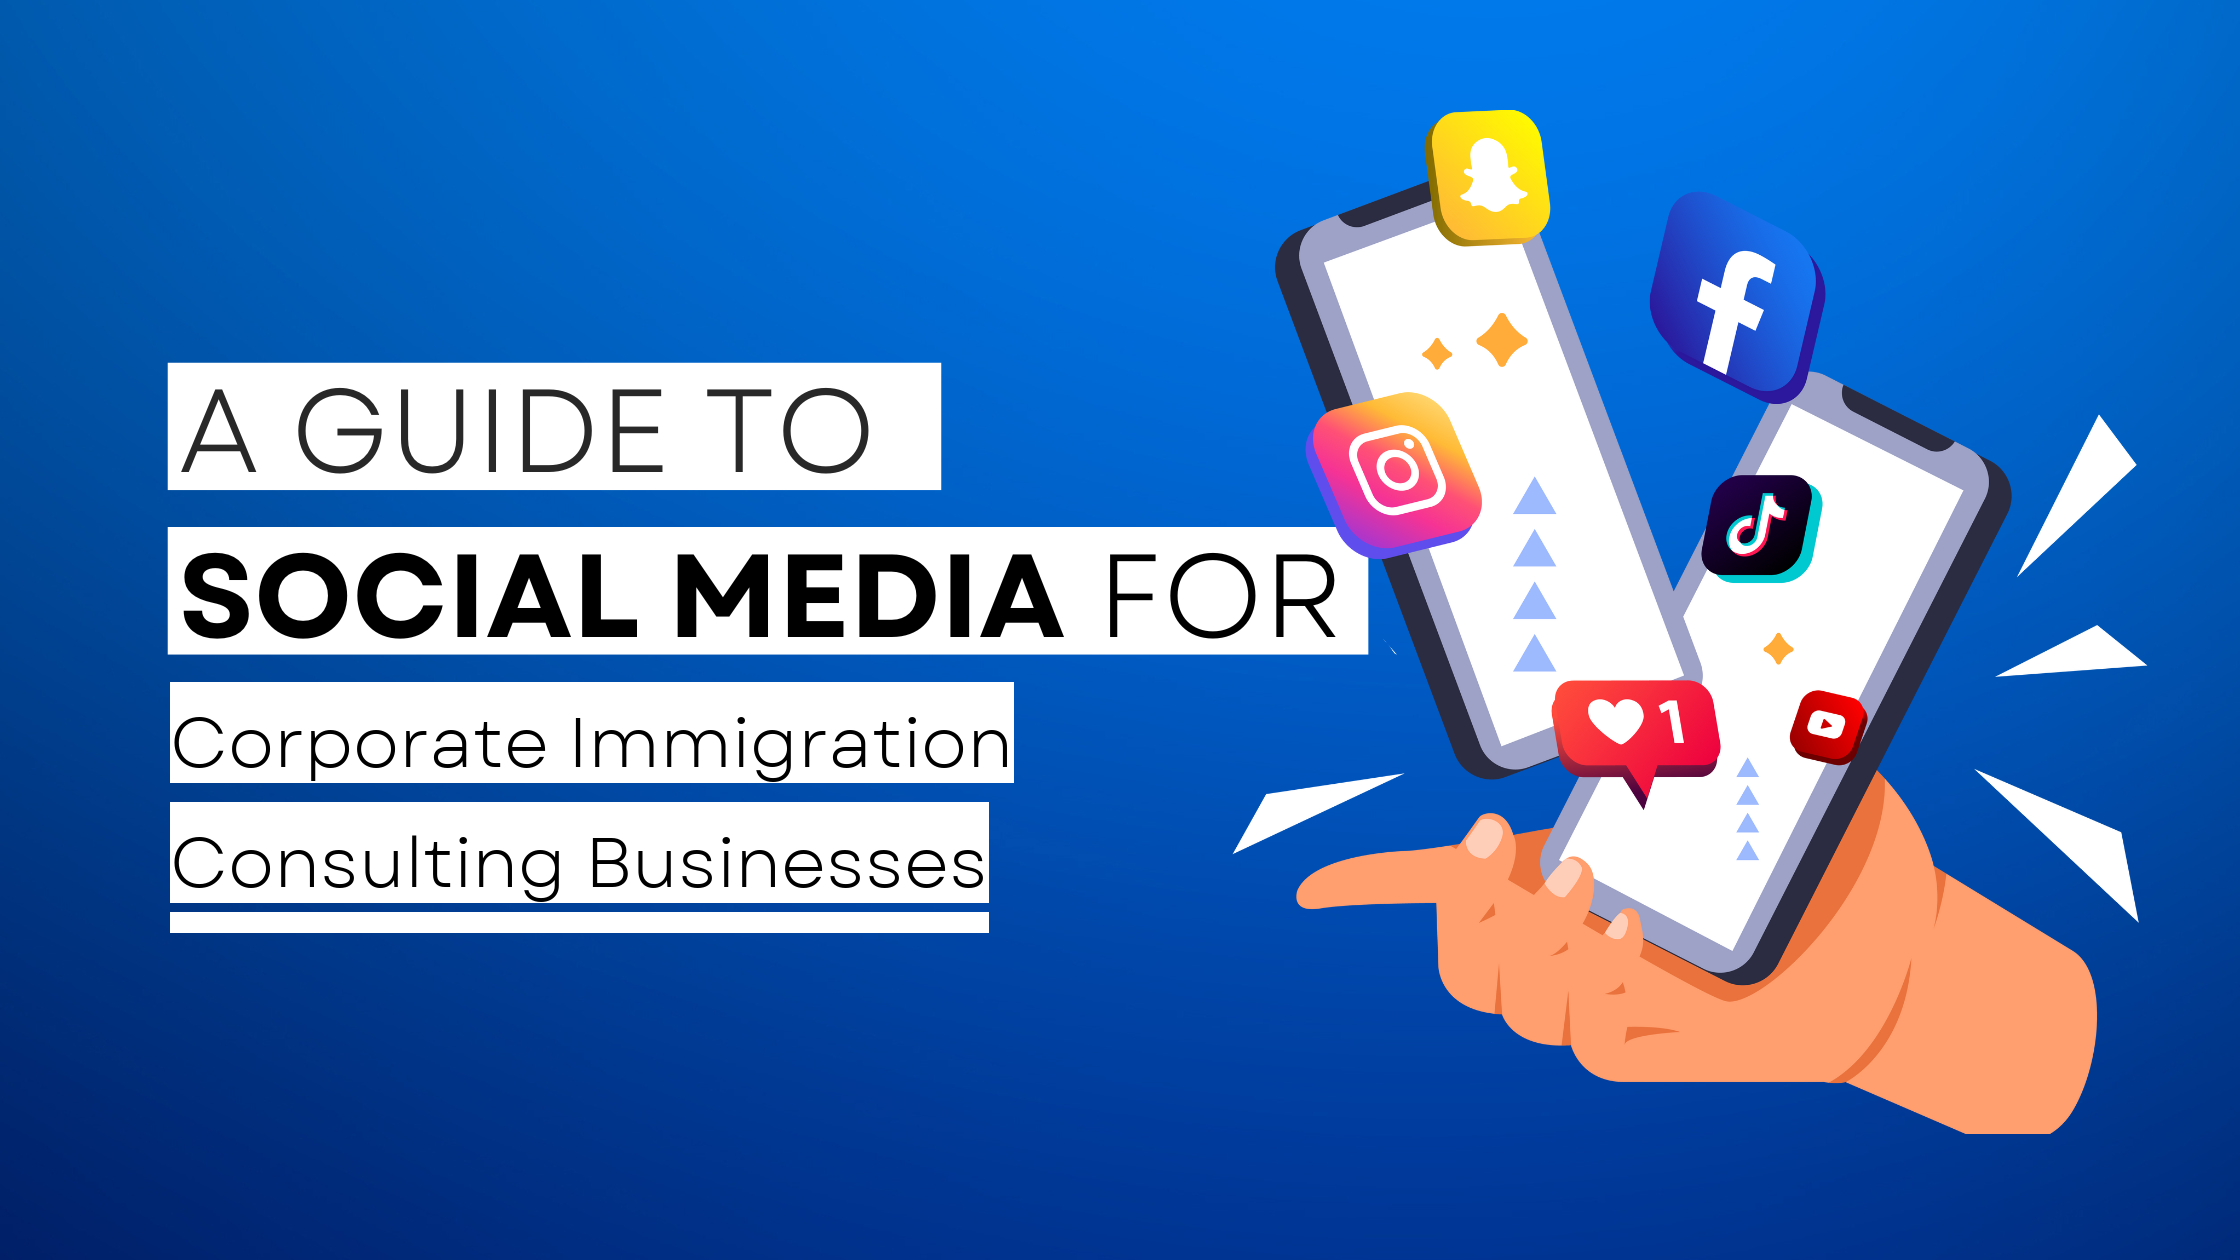 How to start Corporate Immigration Consulting on social media